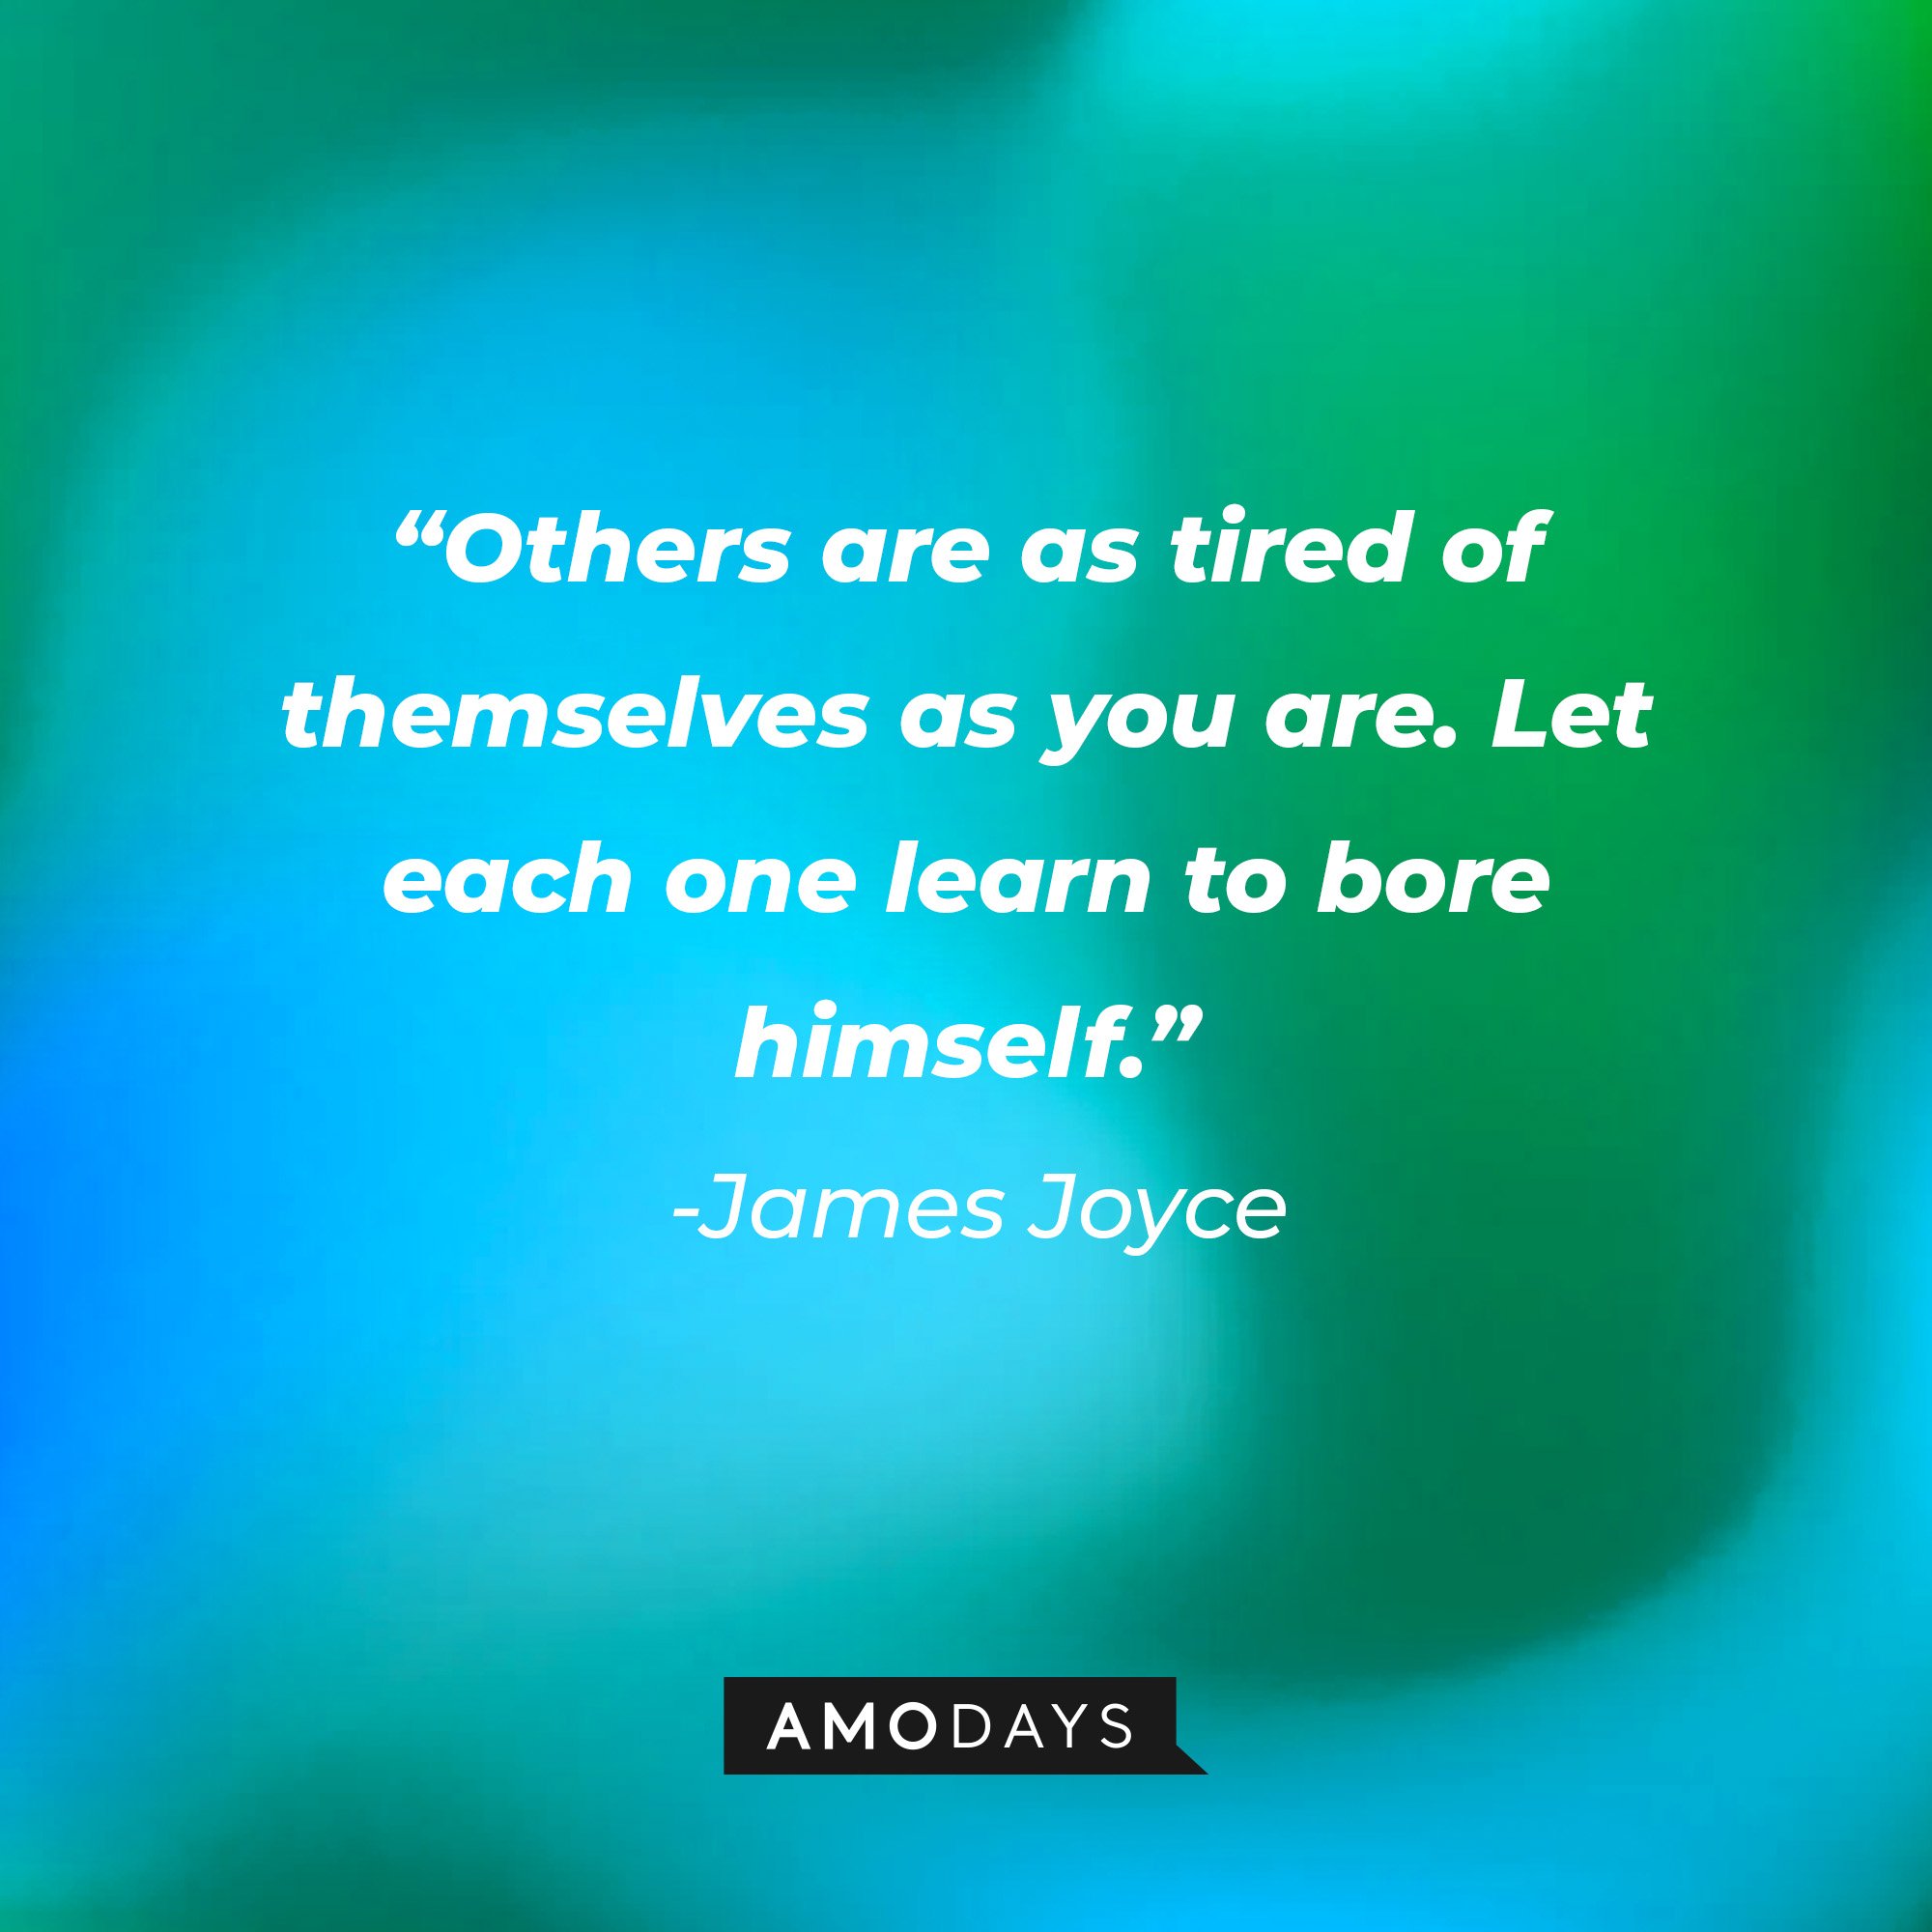 James Joyce's quote: “Others are as tired of themselves as you are. Let each one learn to bore himself.” | Image: AmoDays